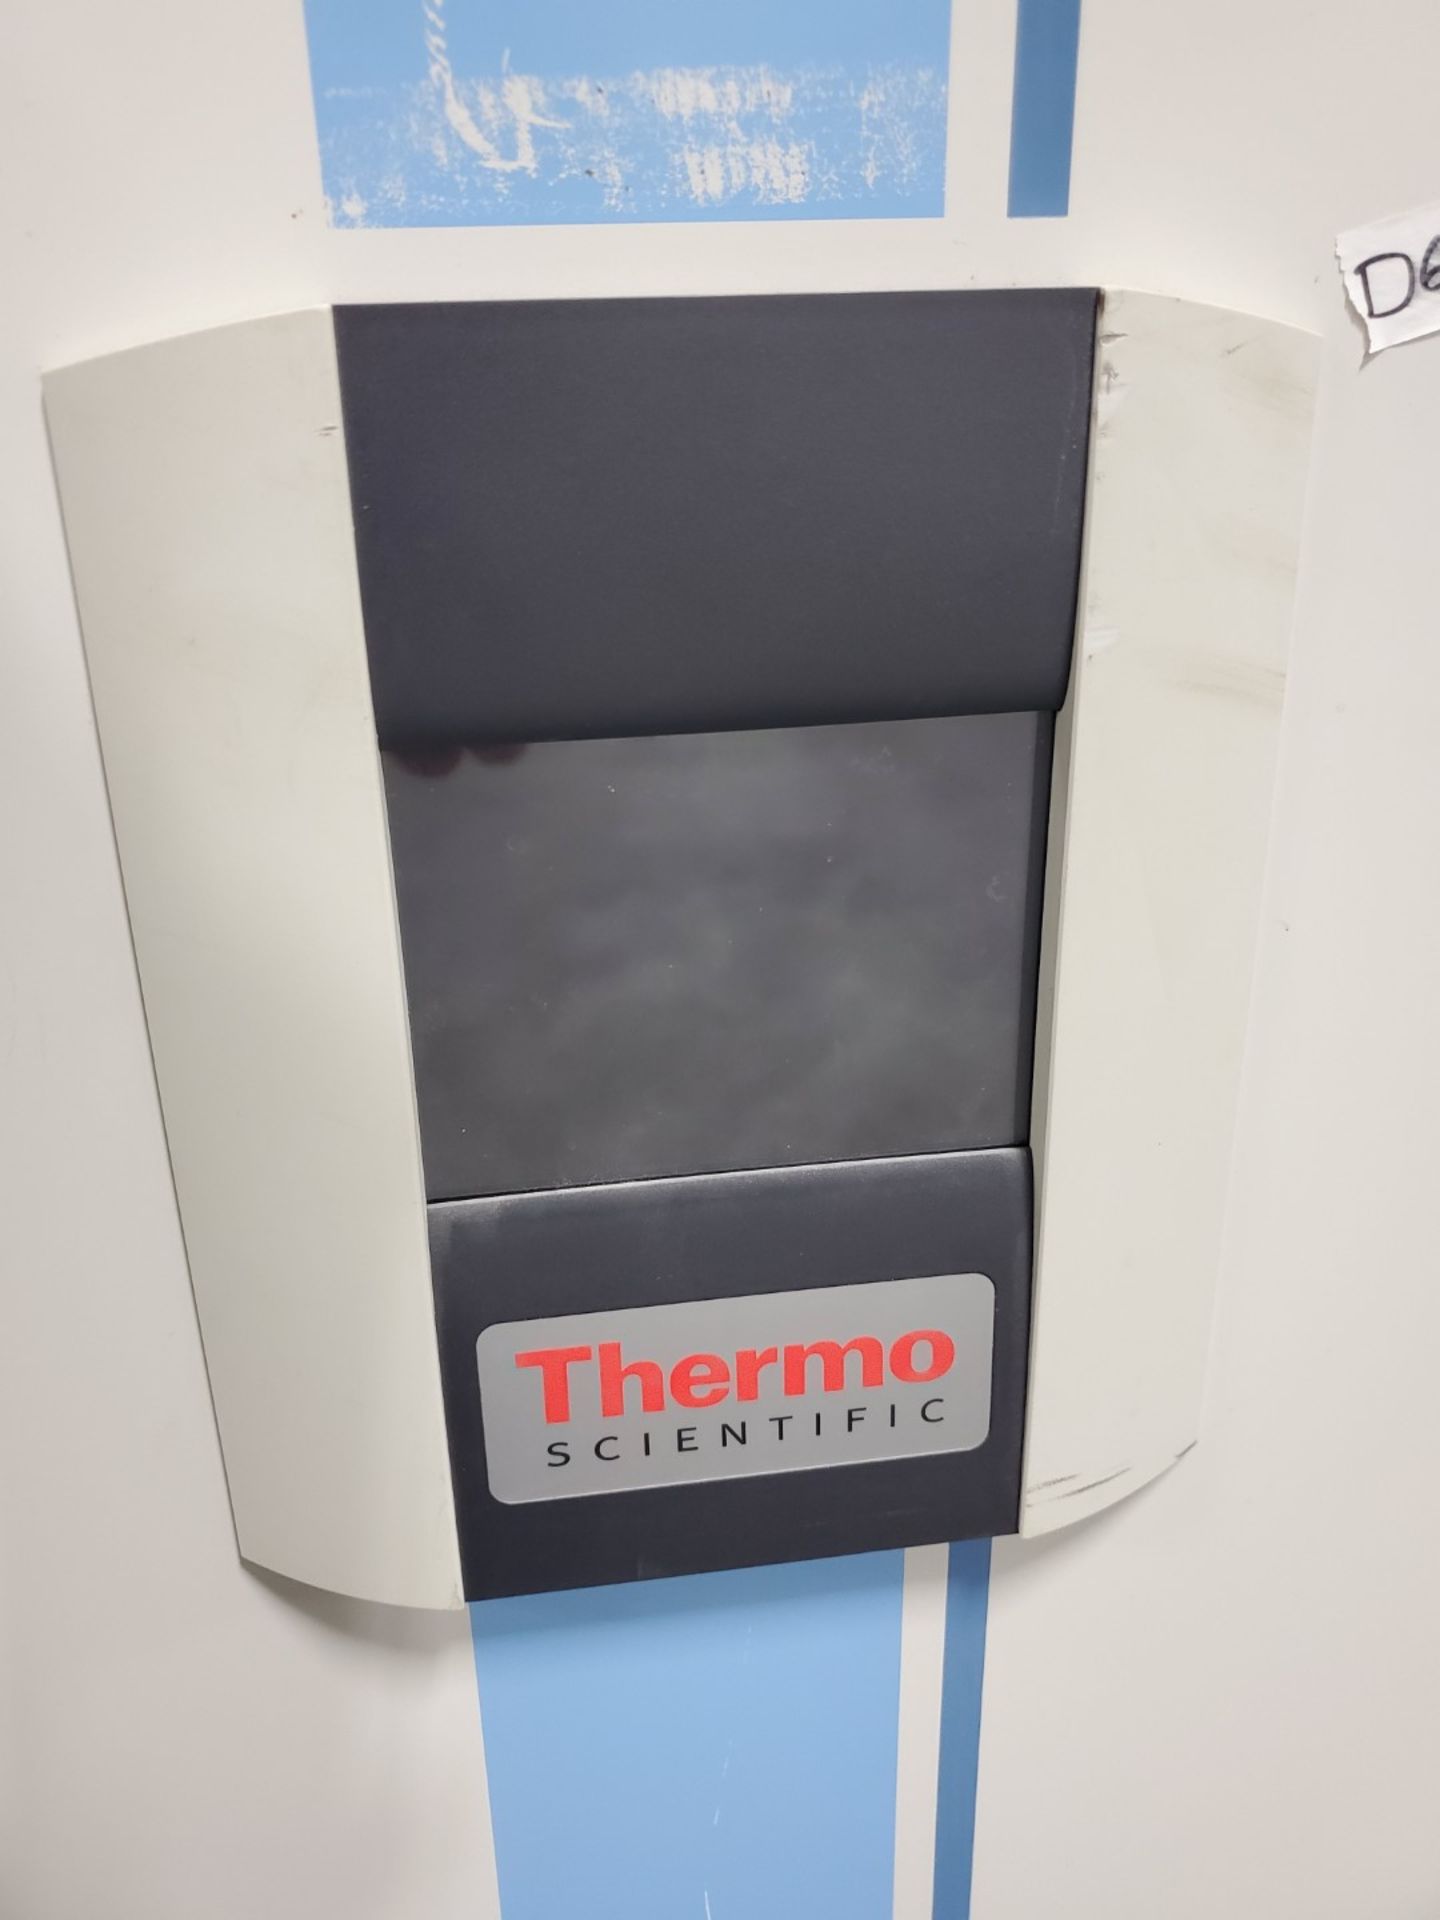 Thermo Scientific Heracell CO2 Incubator, Model 150i - Image 4 of 4